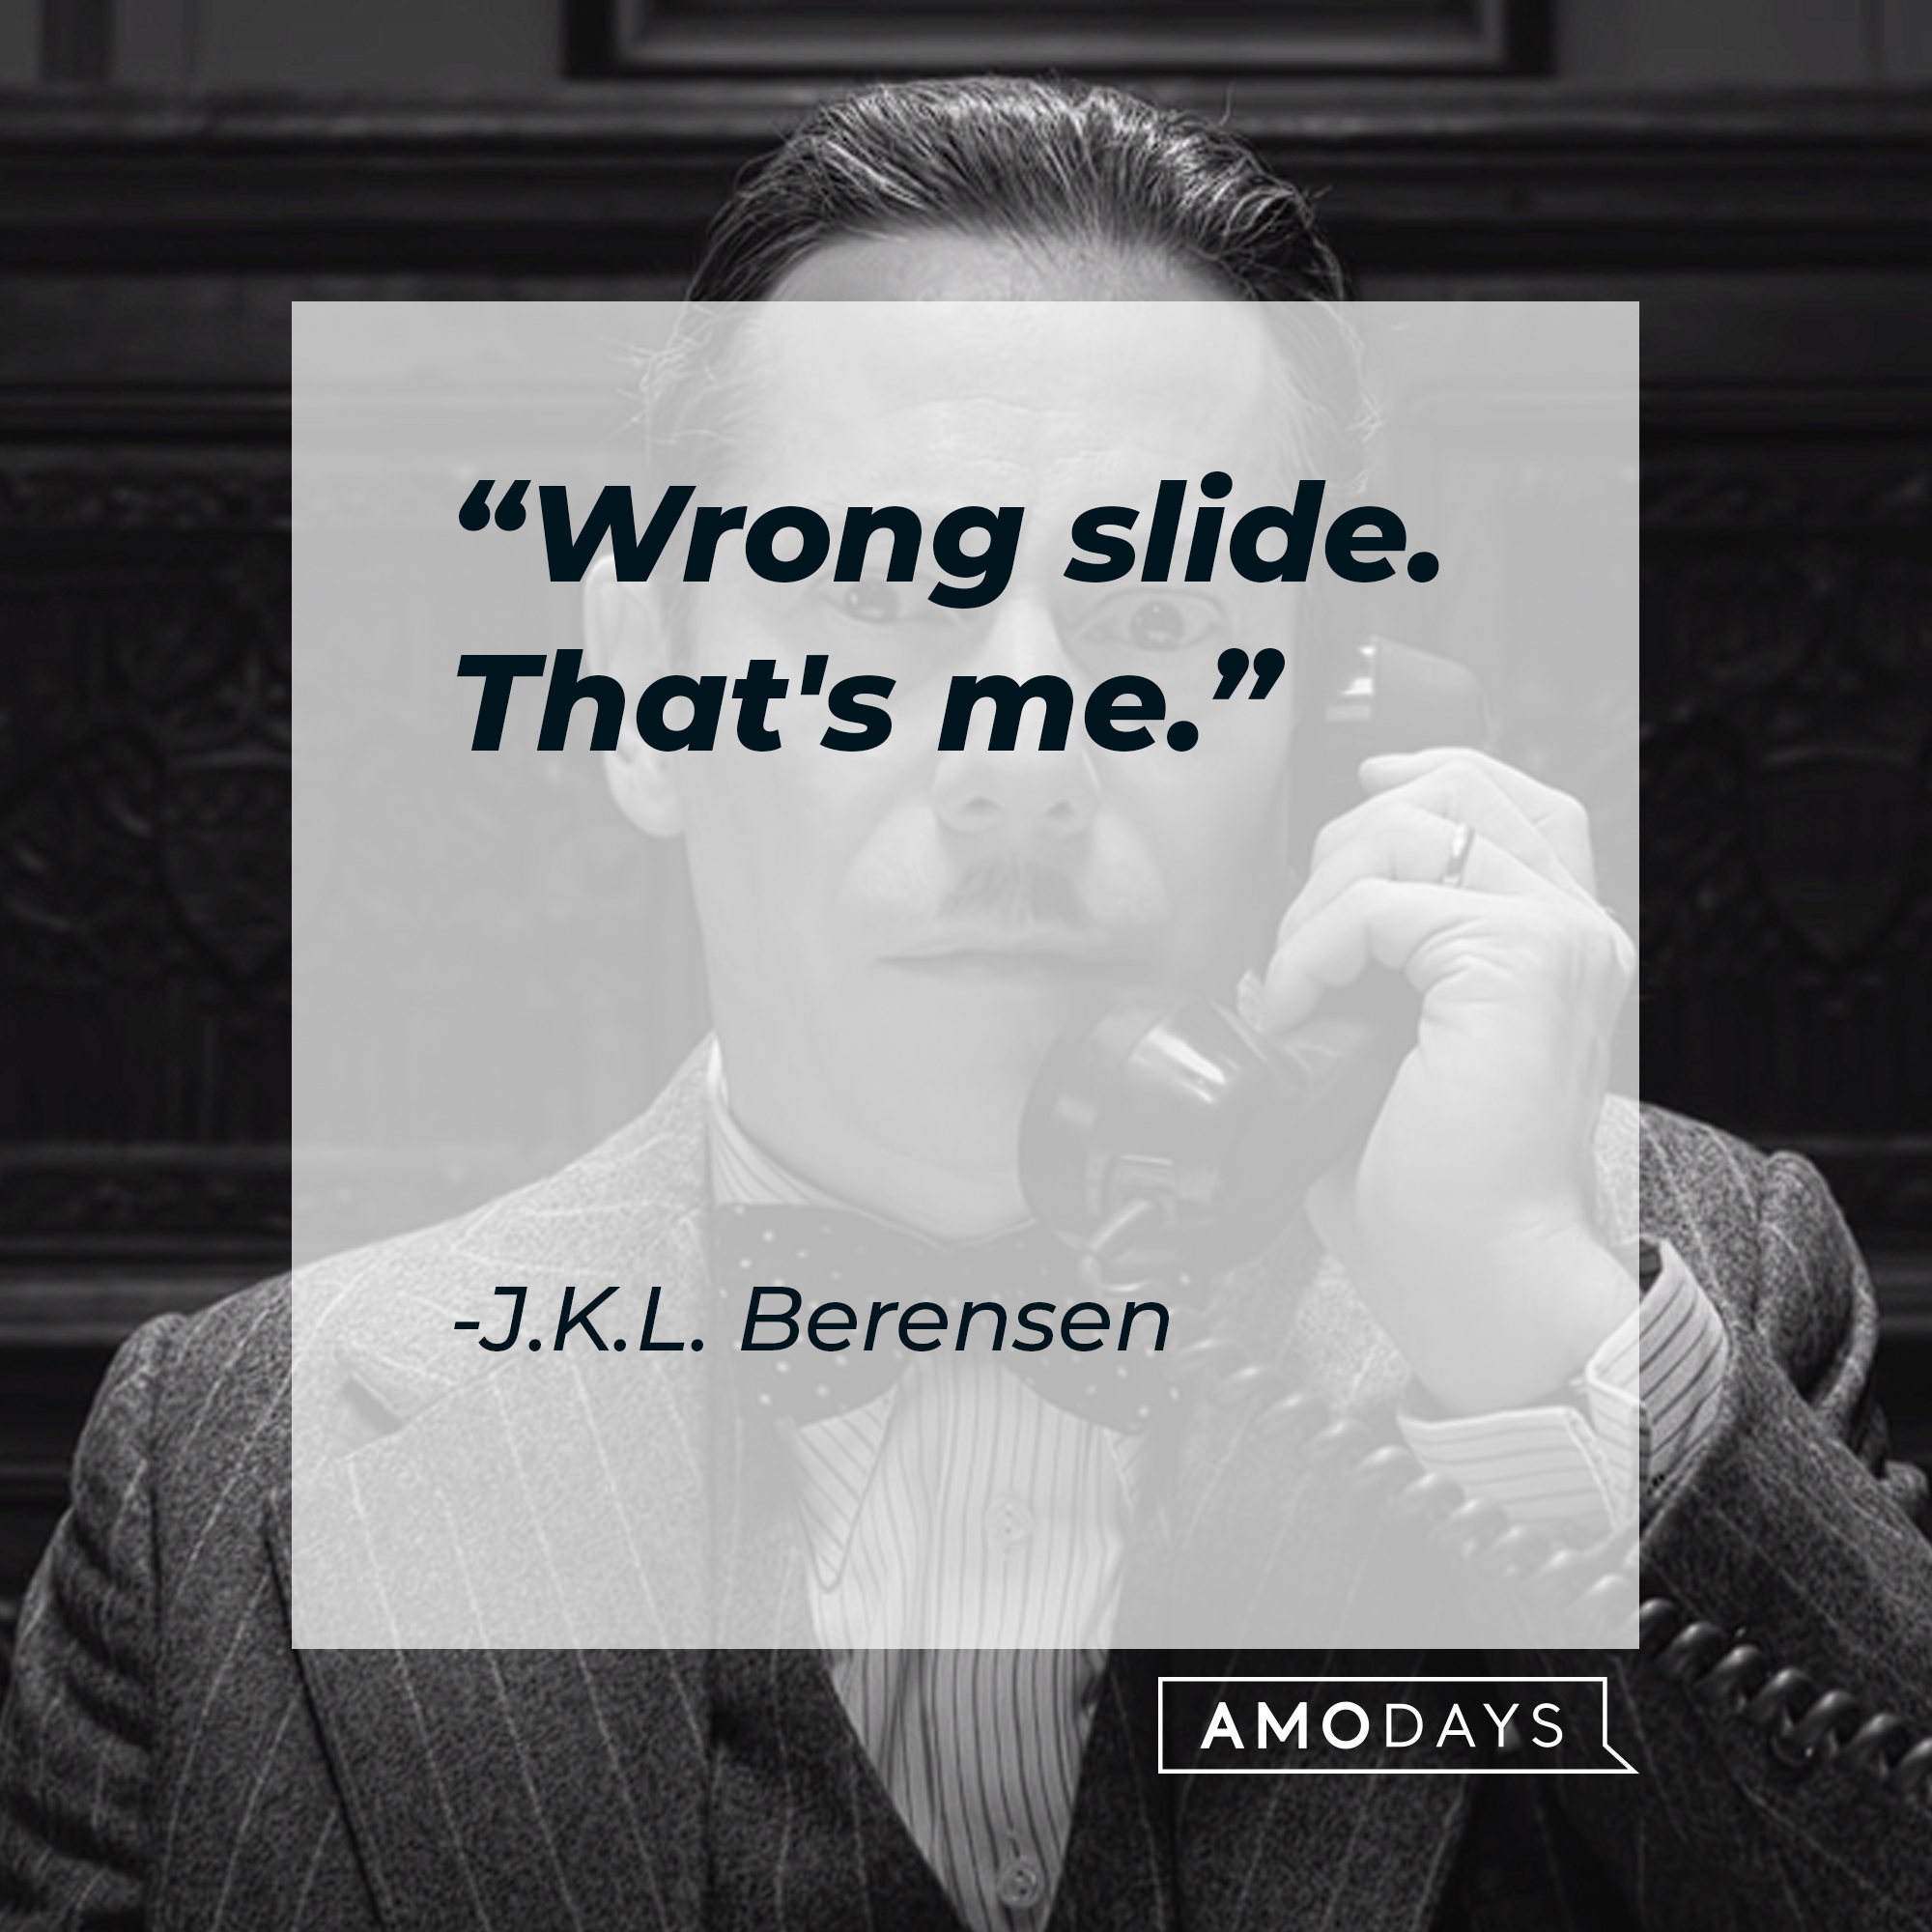 J.K.L. Berensen's quote: "Wrong slide. That's me." | Source: youtube.com/searchlightpictures